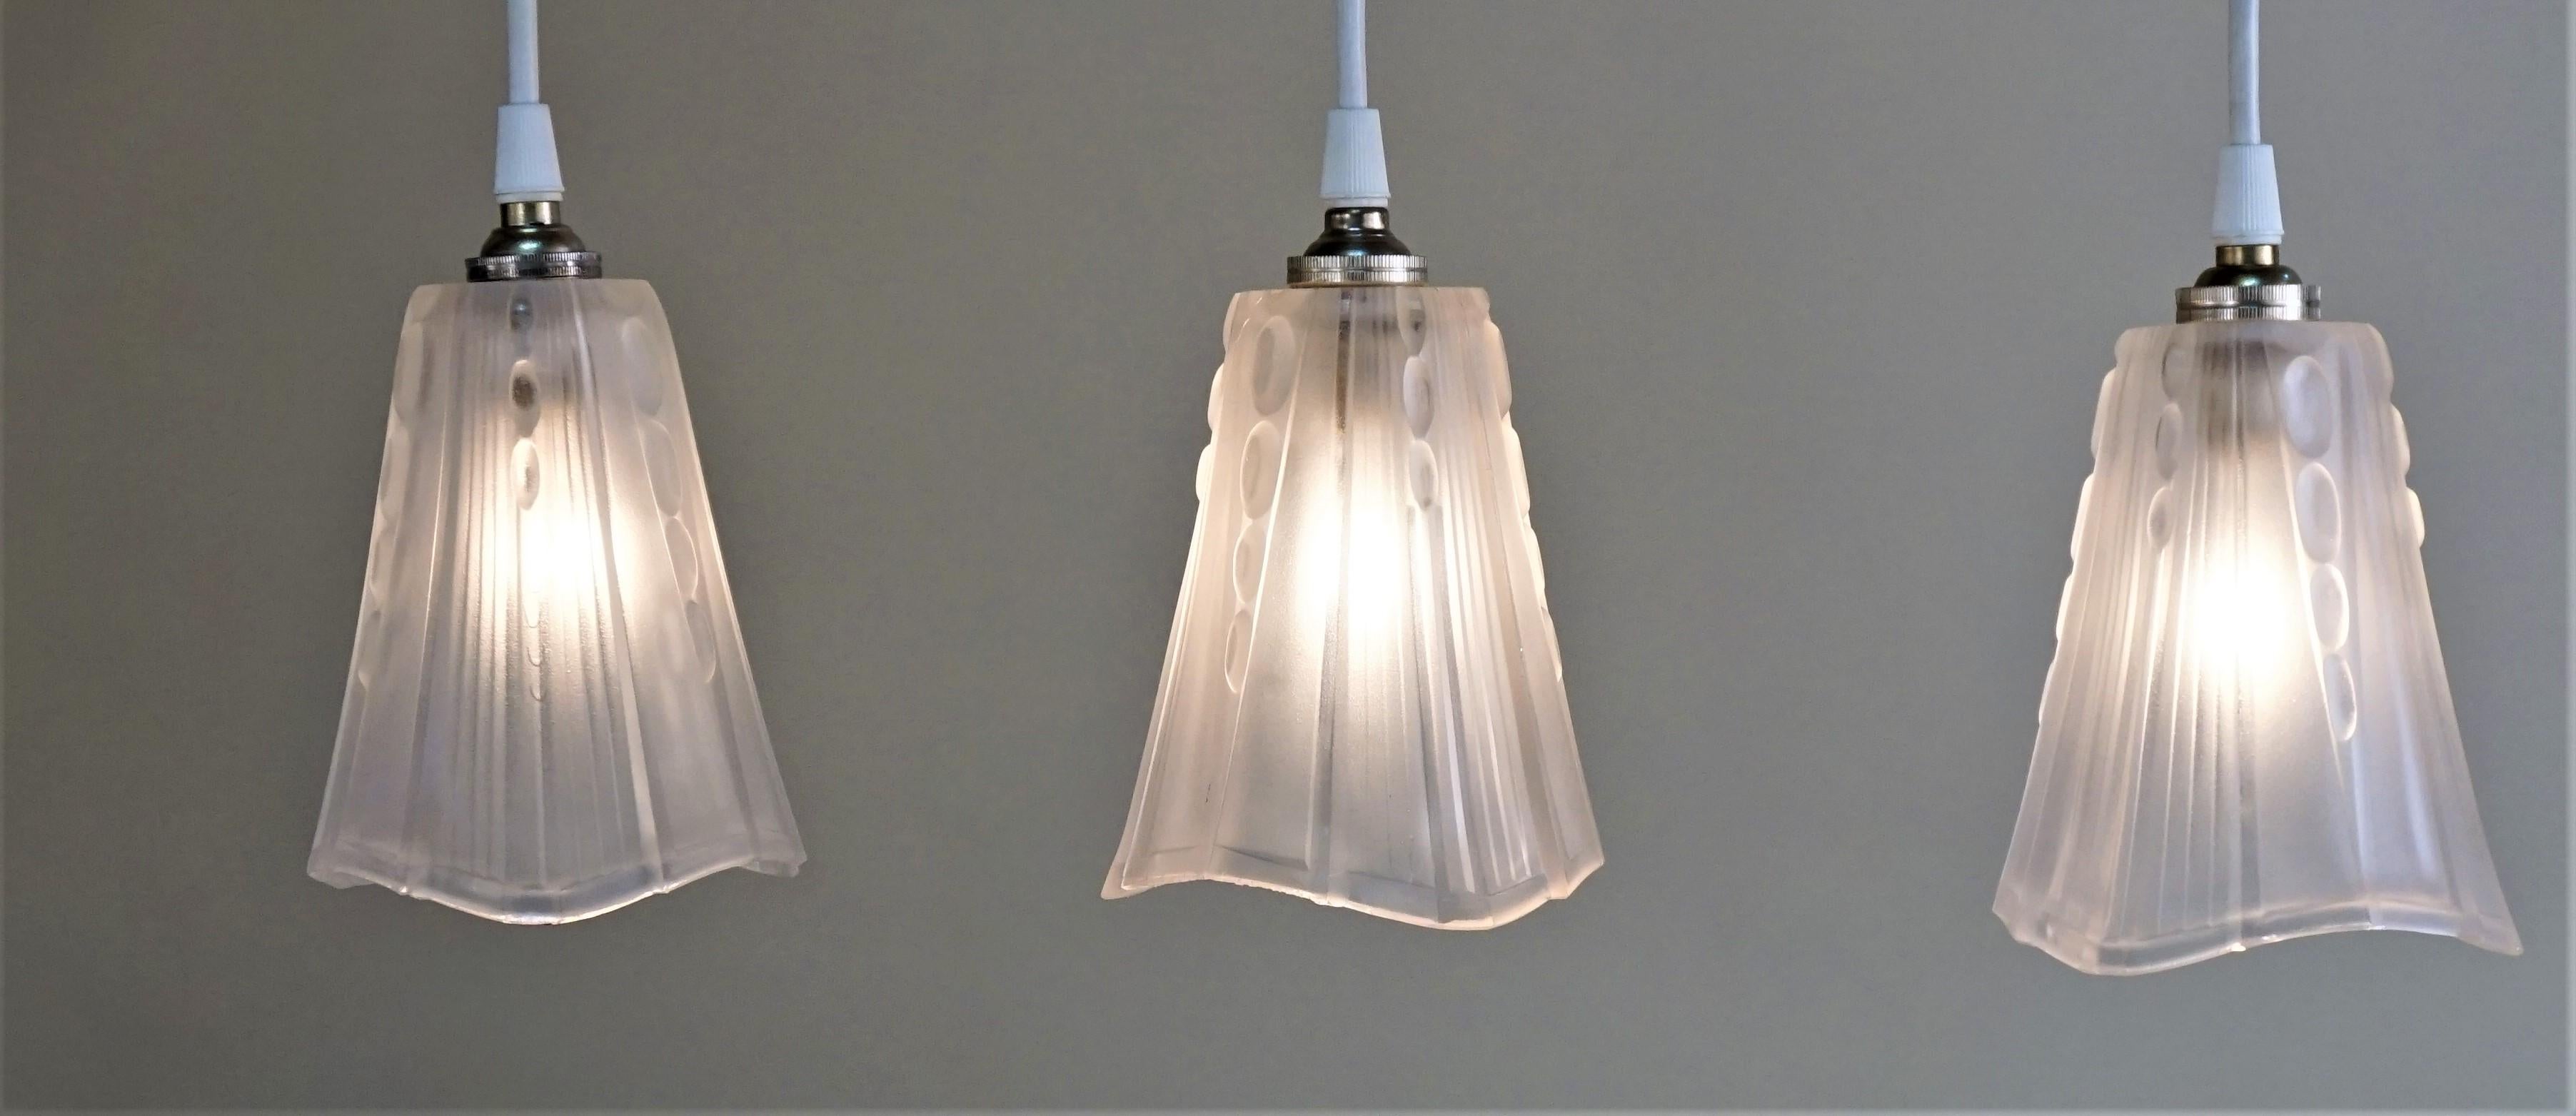 Set of three 1930s Art Deco glass shades by E.J.G. that have been modified with new white cord and nickel canopy as pendant lights.

Price is for set of 3.